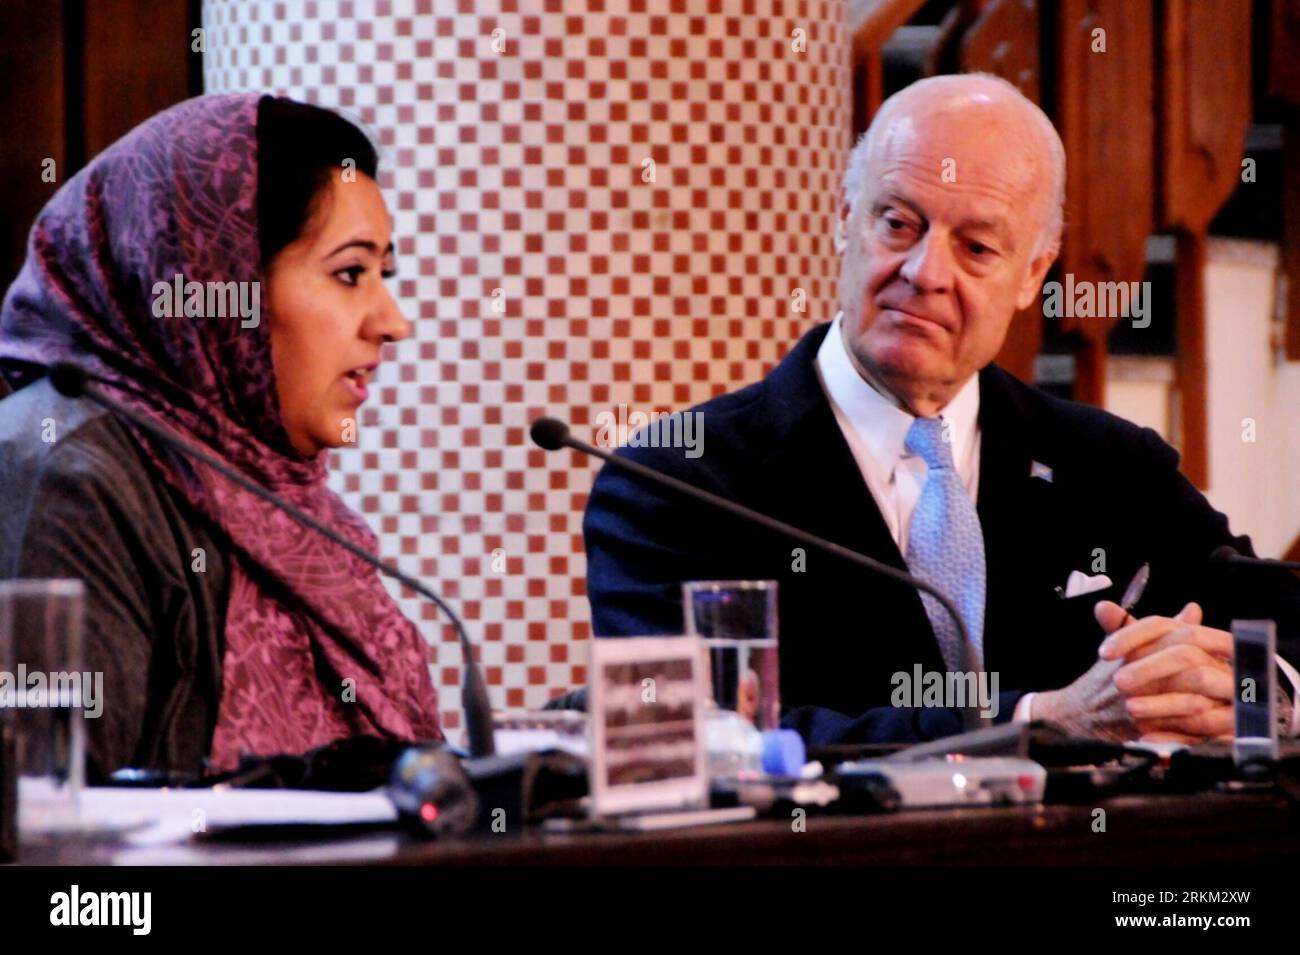 Bildnummer: 56413743  Datum: 23.11.2011  Copyright: imago/Xinhua (111123) -- KABUL, Nov. 23, 2011 (Xinhua) -- the United Nations special representative in Afghanistan Staffan de Mistura (R), and Samira Hamidi, head of Afghan women network, attend a news conference in Kabul, on Nov. 23, 2011. The UN mission in Afghanistan on Wednesday called on Afghan government to protect the women s rights and improve the implementation of law for Elimination of Violence against Women in the country. (Xinhua/Omid) (zjl) AFGHANISTAN-KABUL-UN PRESS CONFERENCE PUBLICATIONxNOTxINxCHN People Politik x0x xtm 2011 q Stock Photo